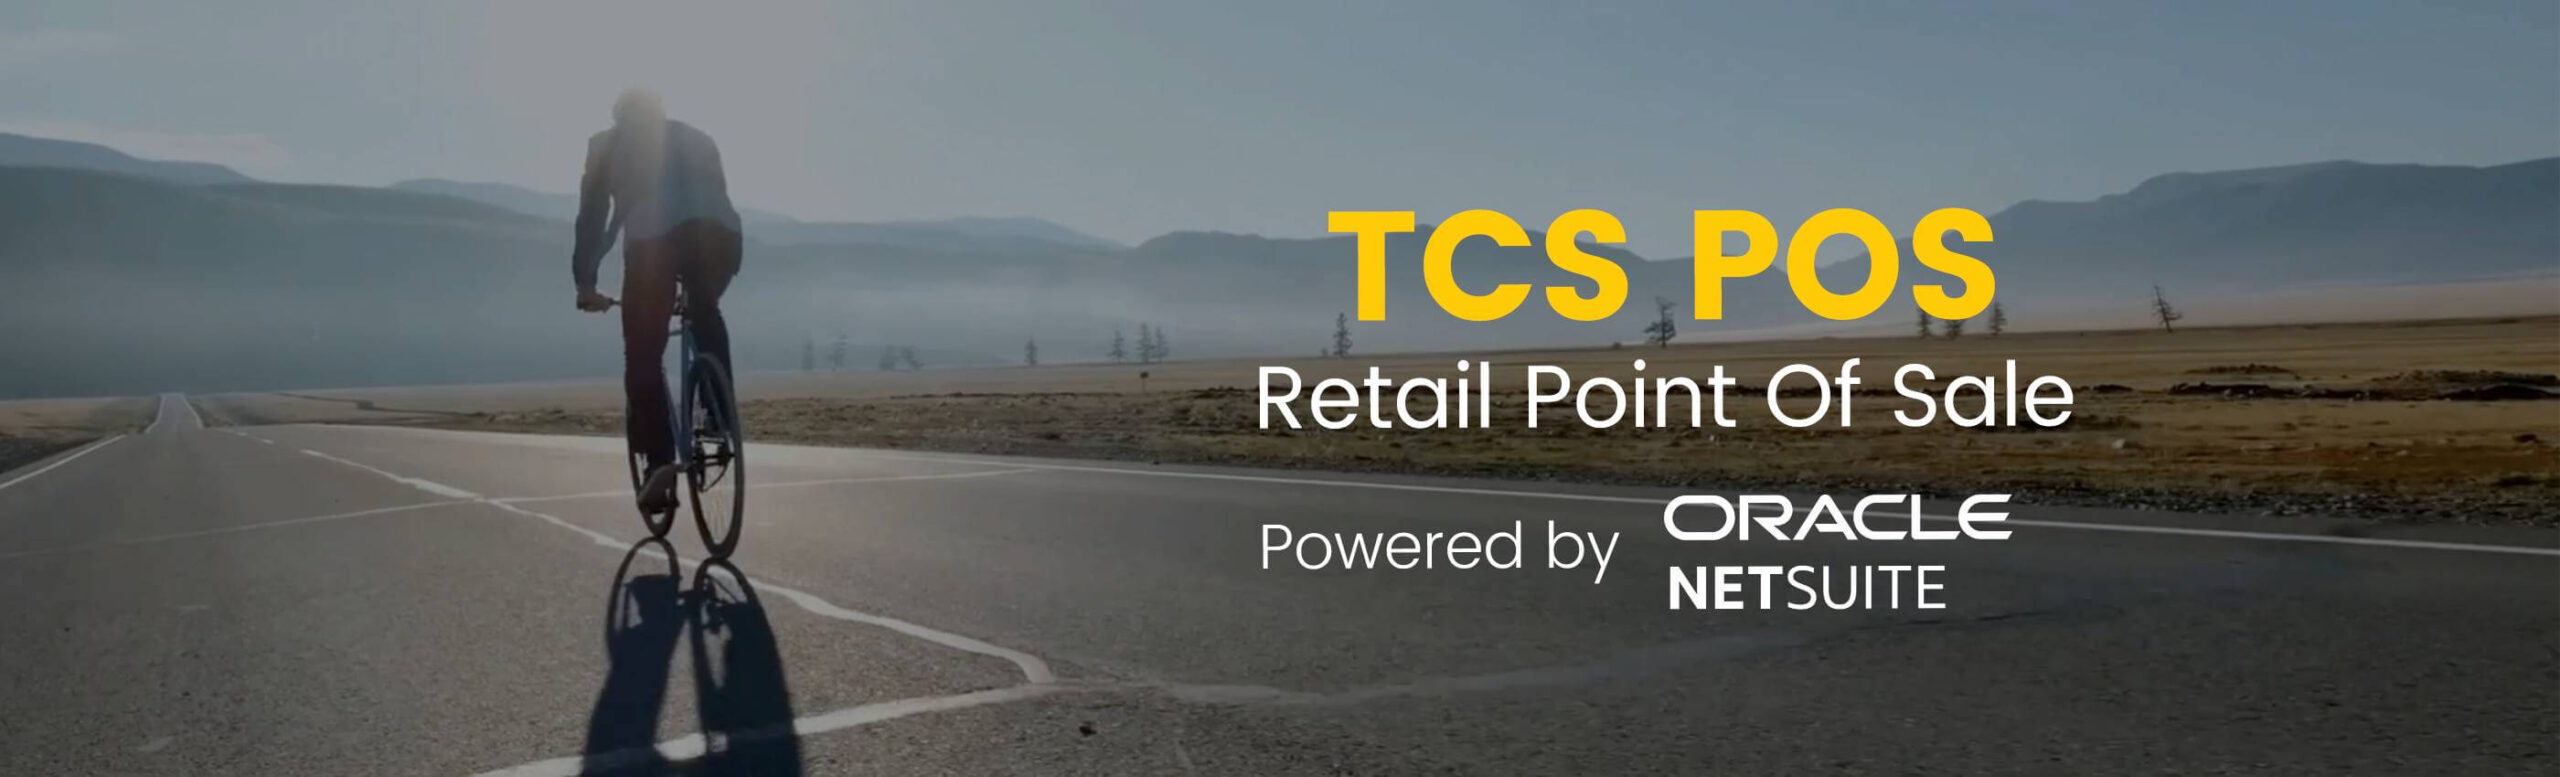 TCS POS for Oracle Netsuite POS